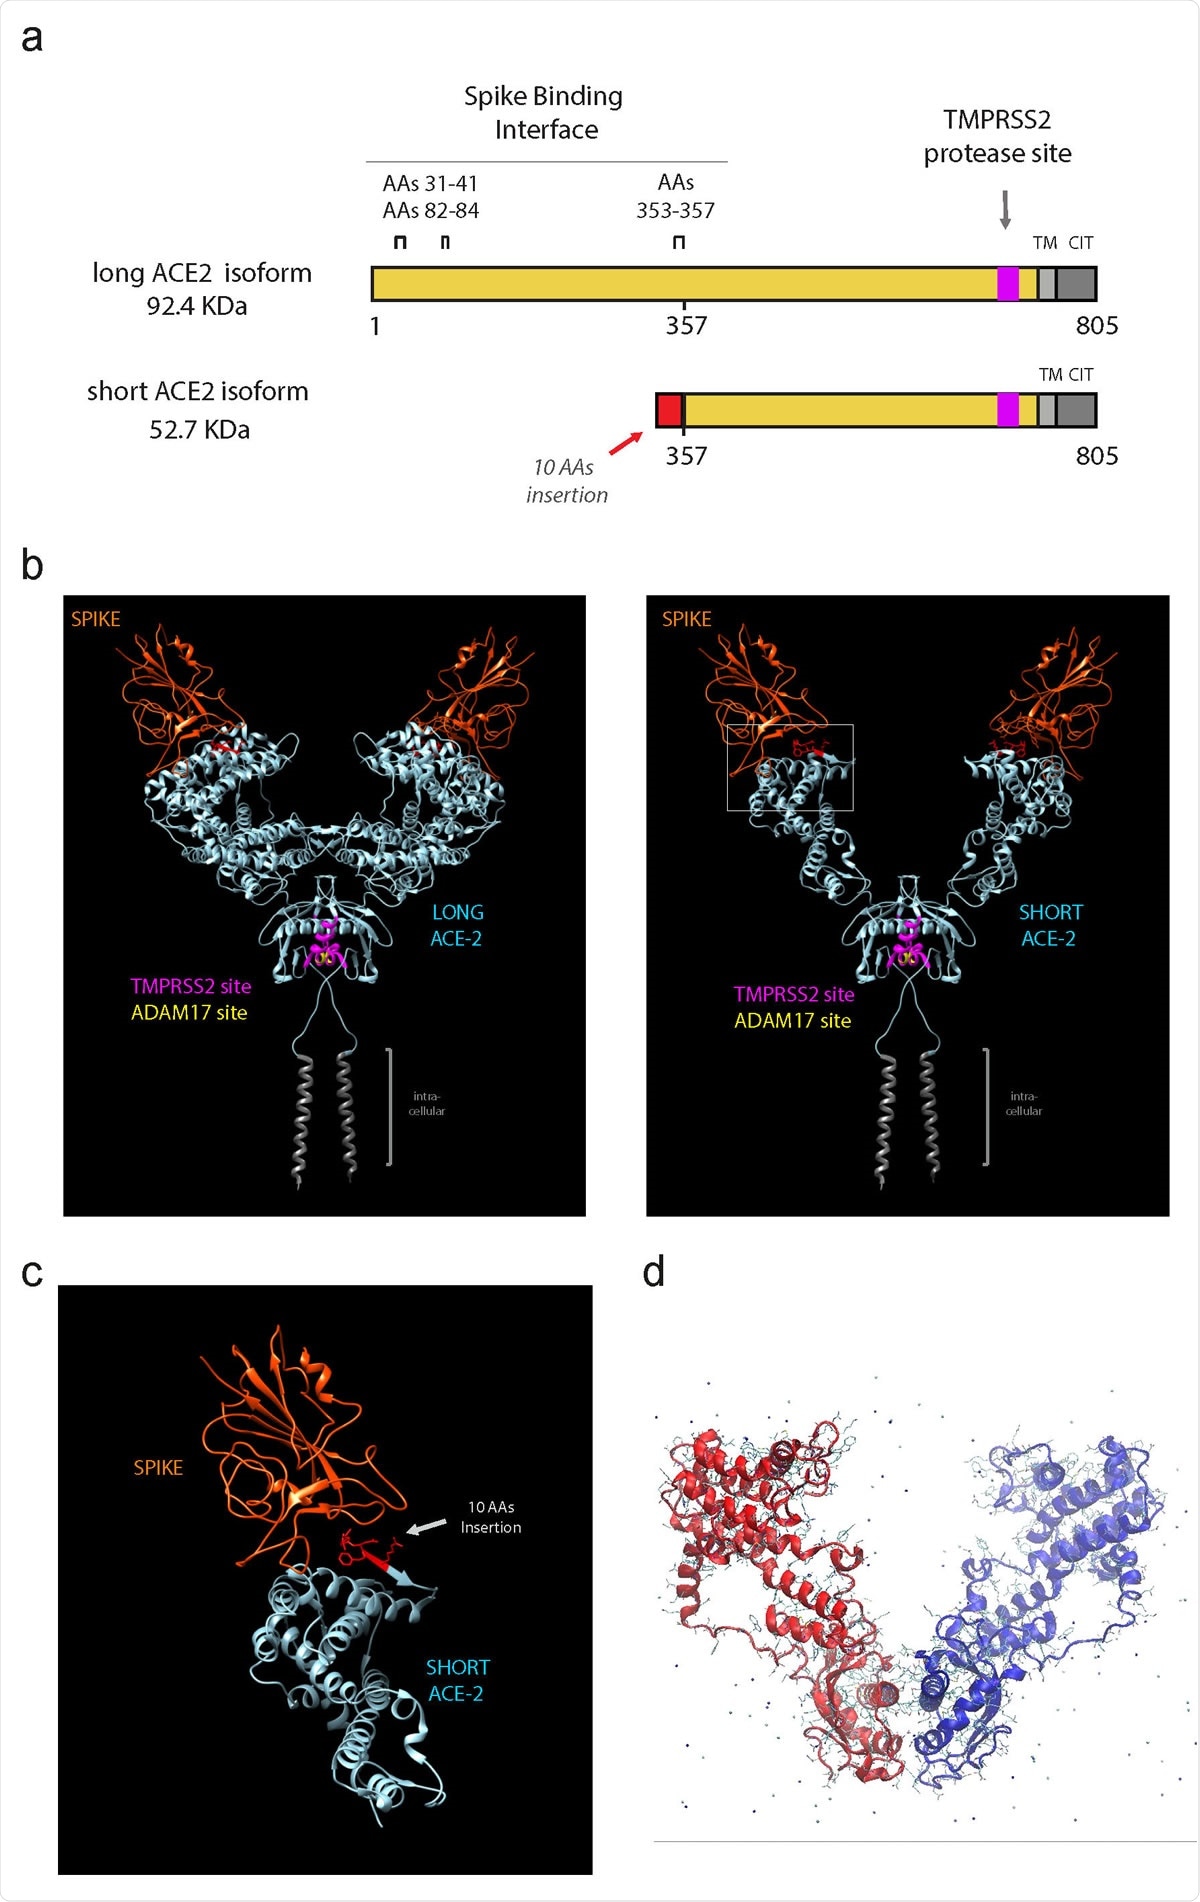 Short ACE2 lacks most of Spike binding regions but contains TMPRSS2 and ADAM17 proteases site